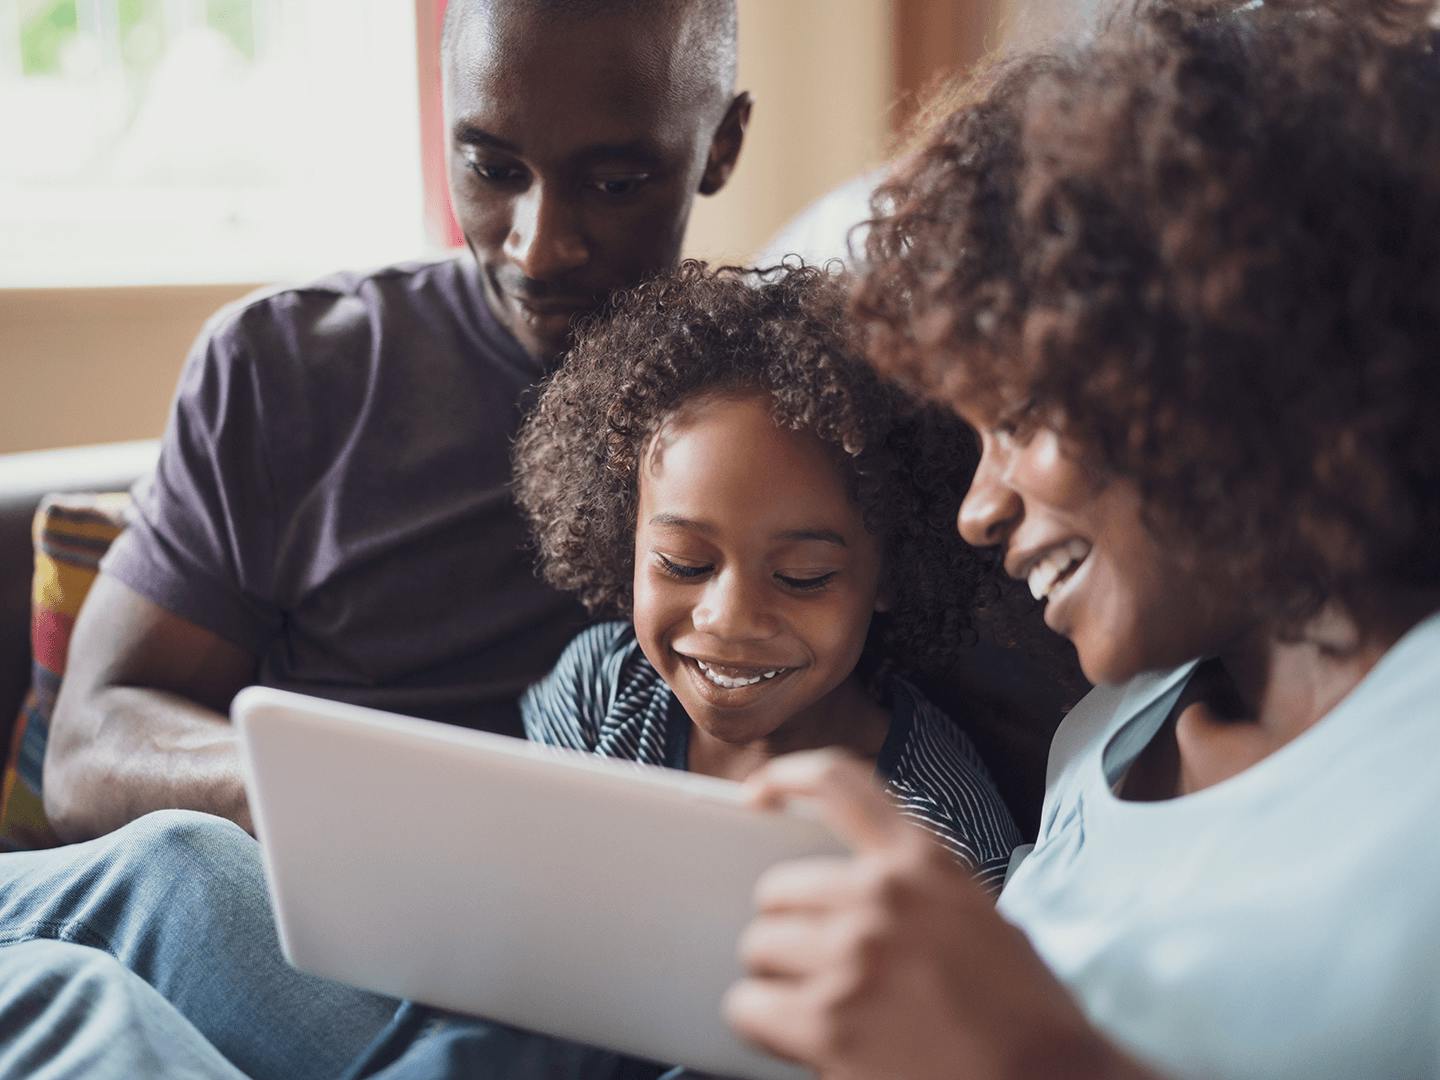 Child and her parents looking at a tablet device together.